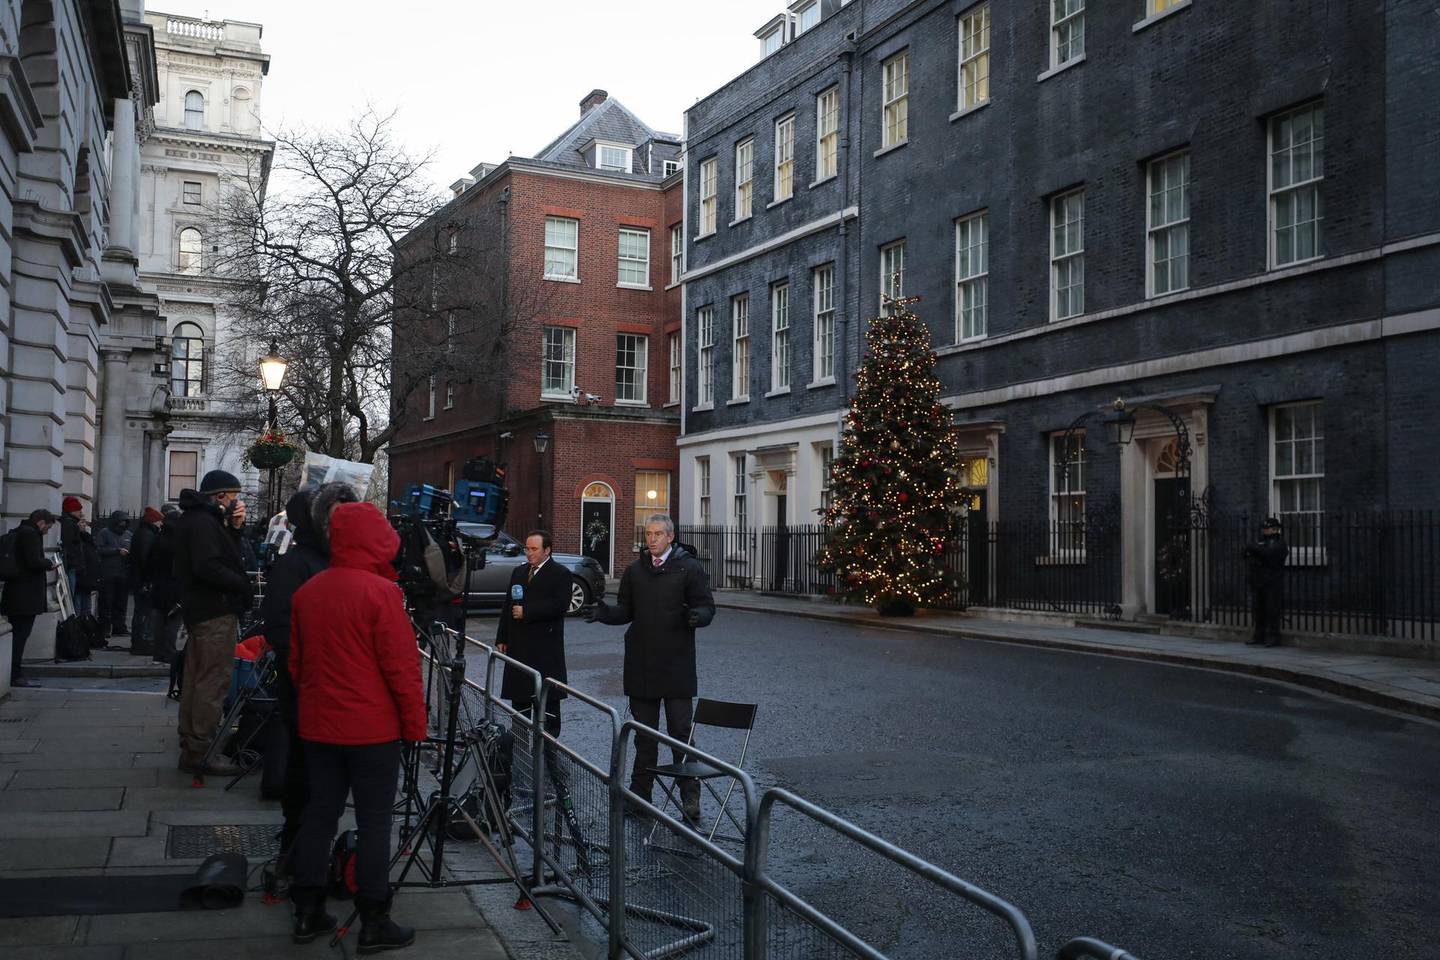 Reporters gather outside number 10 Downing Street, the home of U.K. Prime Minister Boris Johnson, in London, U.K., on Thursday, Dec. 24, 2020. The U.K. and the European Union are on the verge of unveiling a historic post-Brexit trade accord as negotiators work through the night to put the finishing touches to a compromise on fishing rights. Photographer: Jason Alden/Bloomberg